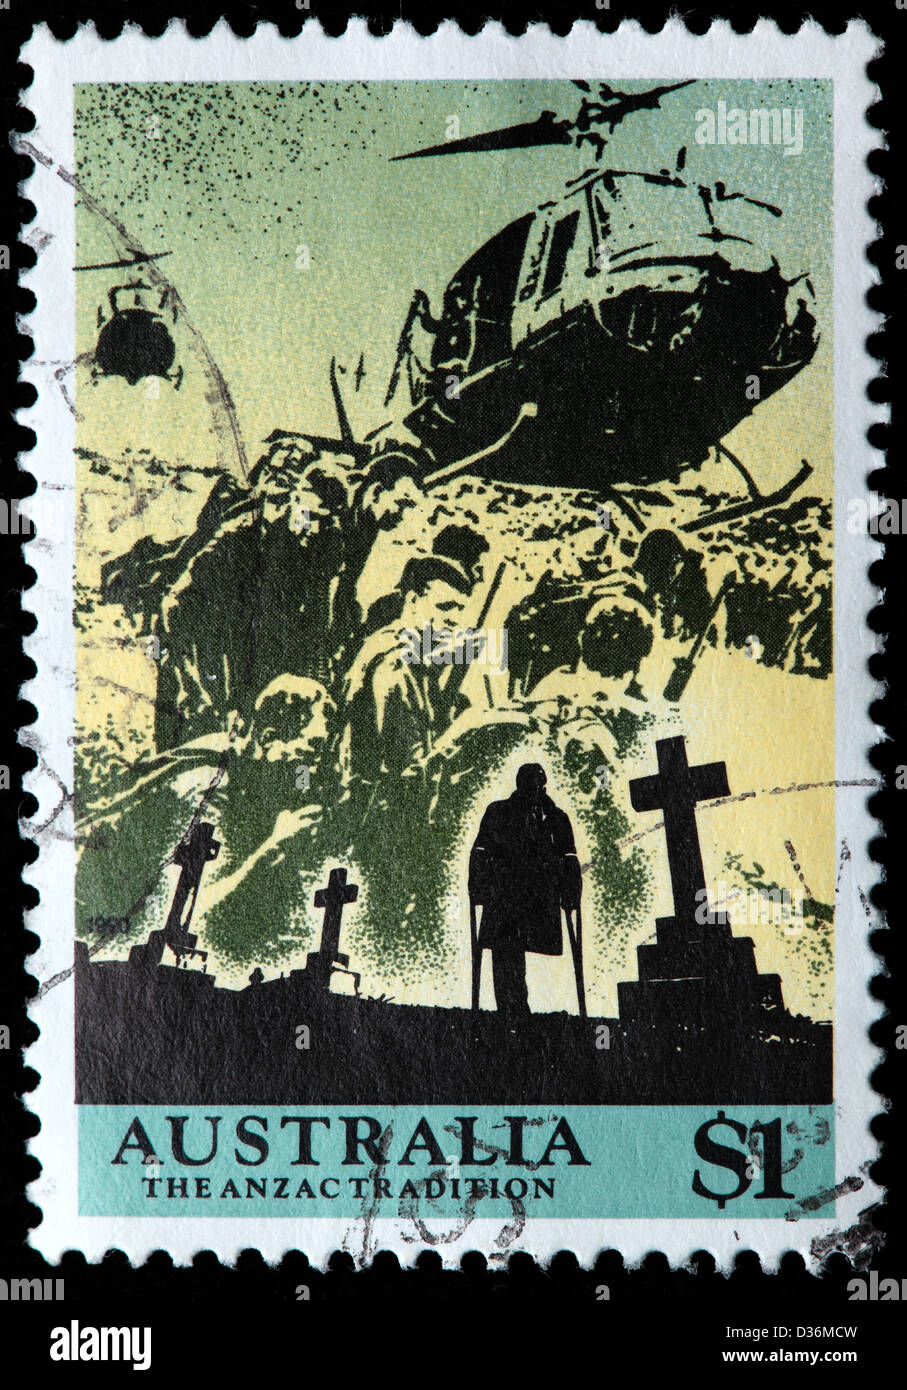 ANZAC (Australian and New Zealand Army Corps) tradition, timbre-poste, l'Australie, 1990 Banque D'Images